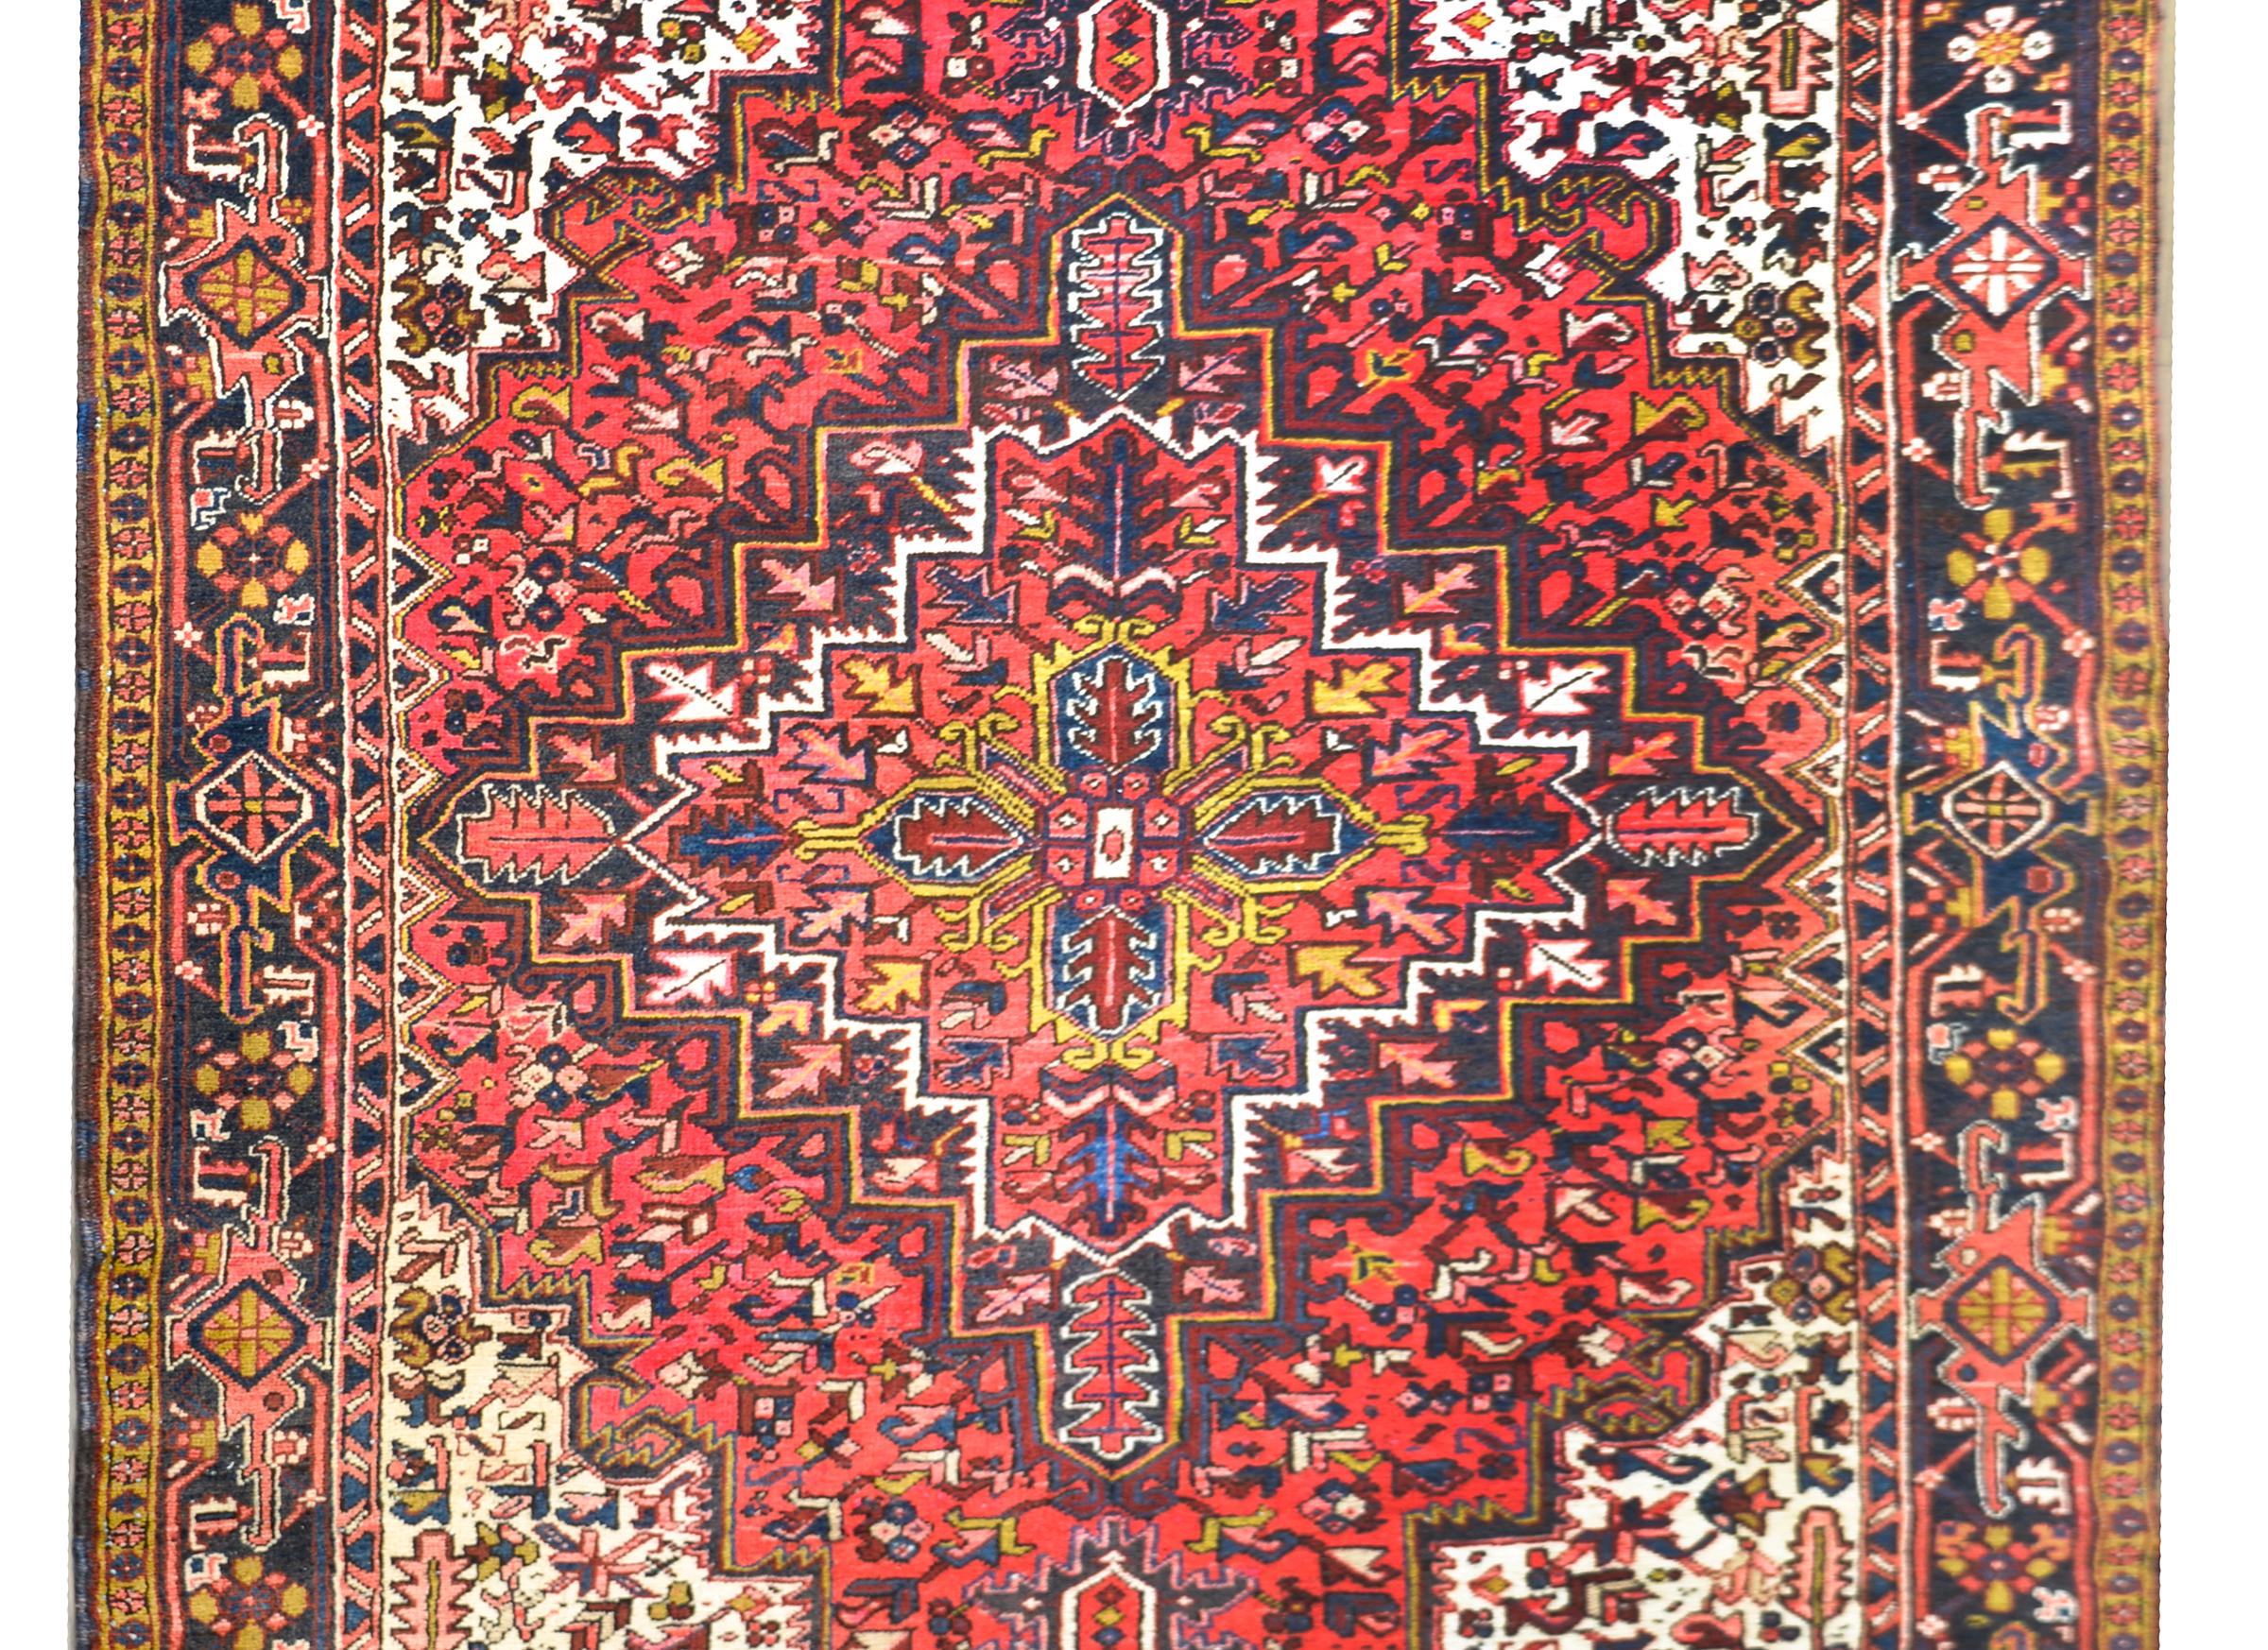 A wonderful vintage Persian hertz rug with a traditional floral patterned medallion against a floral and scrolling vine patterned field, and surrounded by a stylized floral and scrolling vine patterned border.